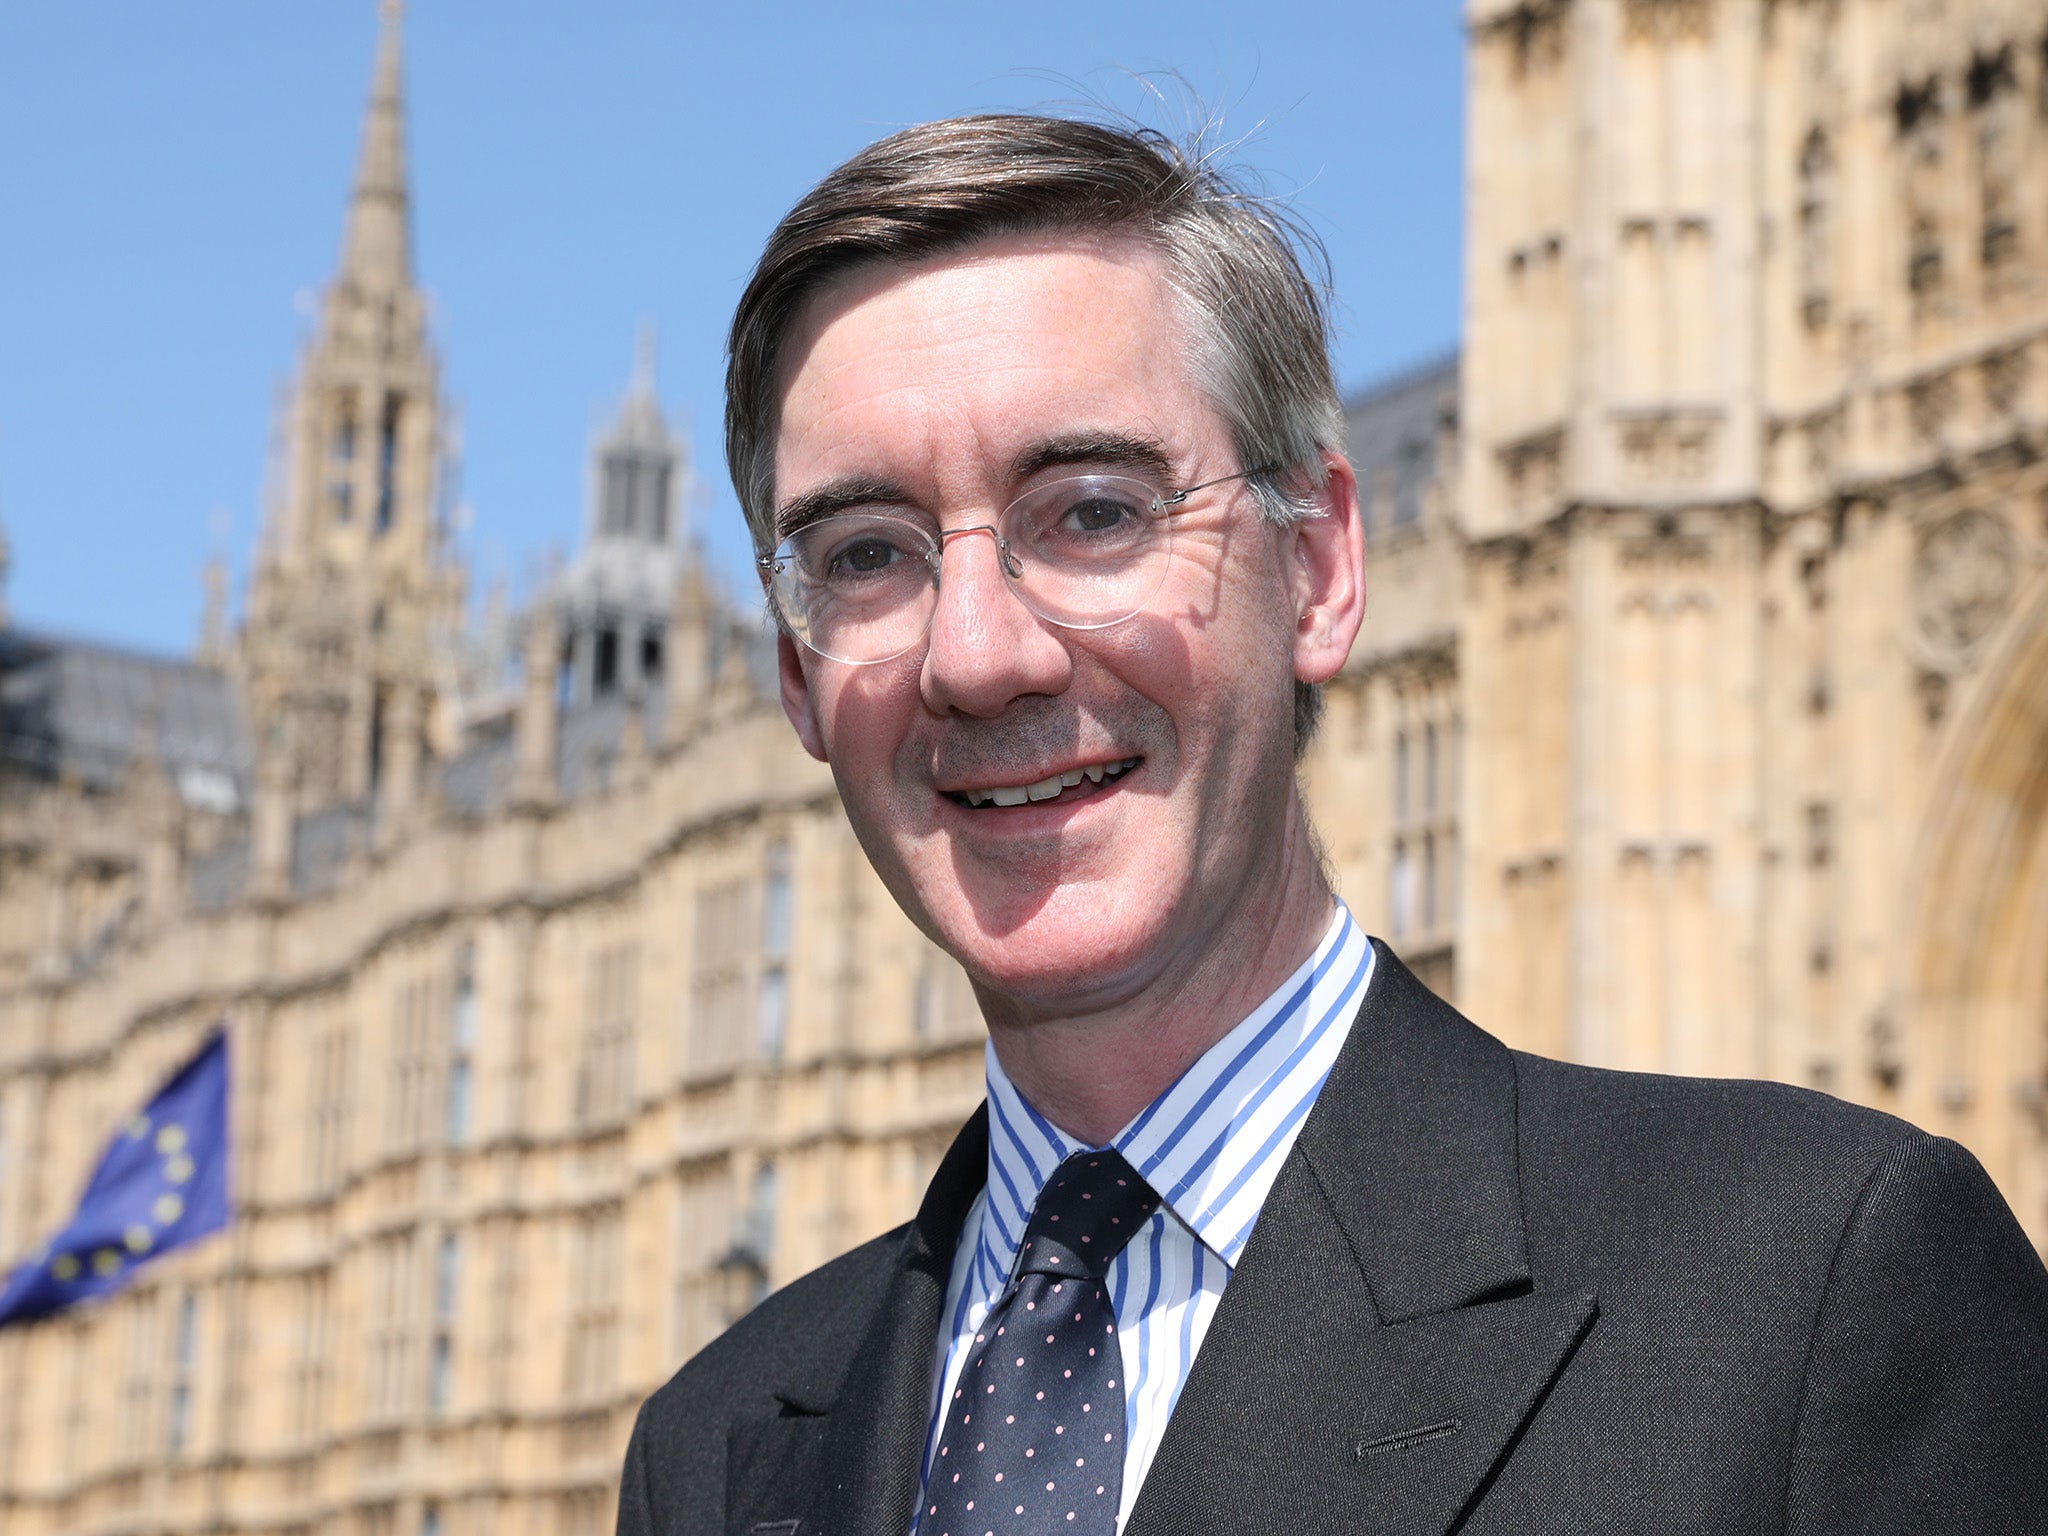 Rees-Mogg has defended the PM’s decision to prorogue parliament